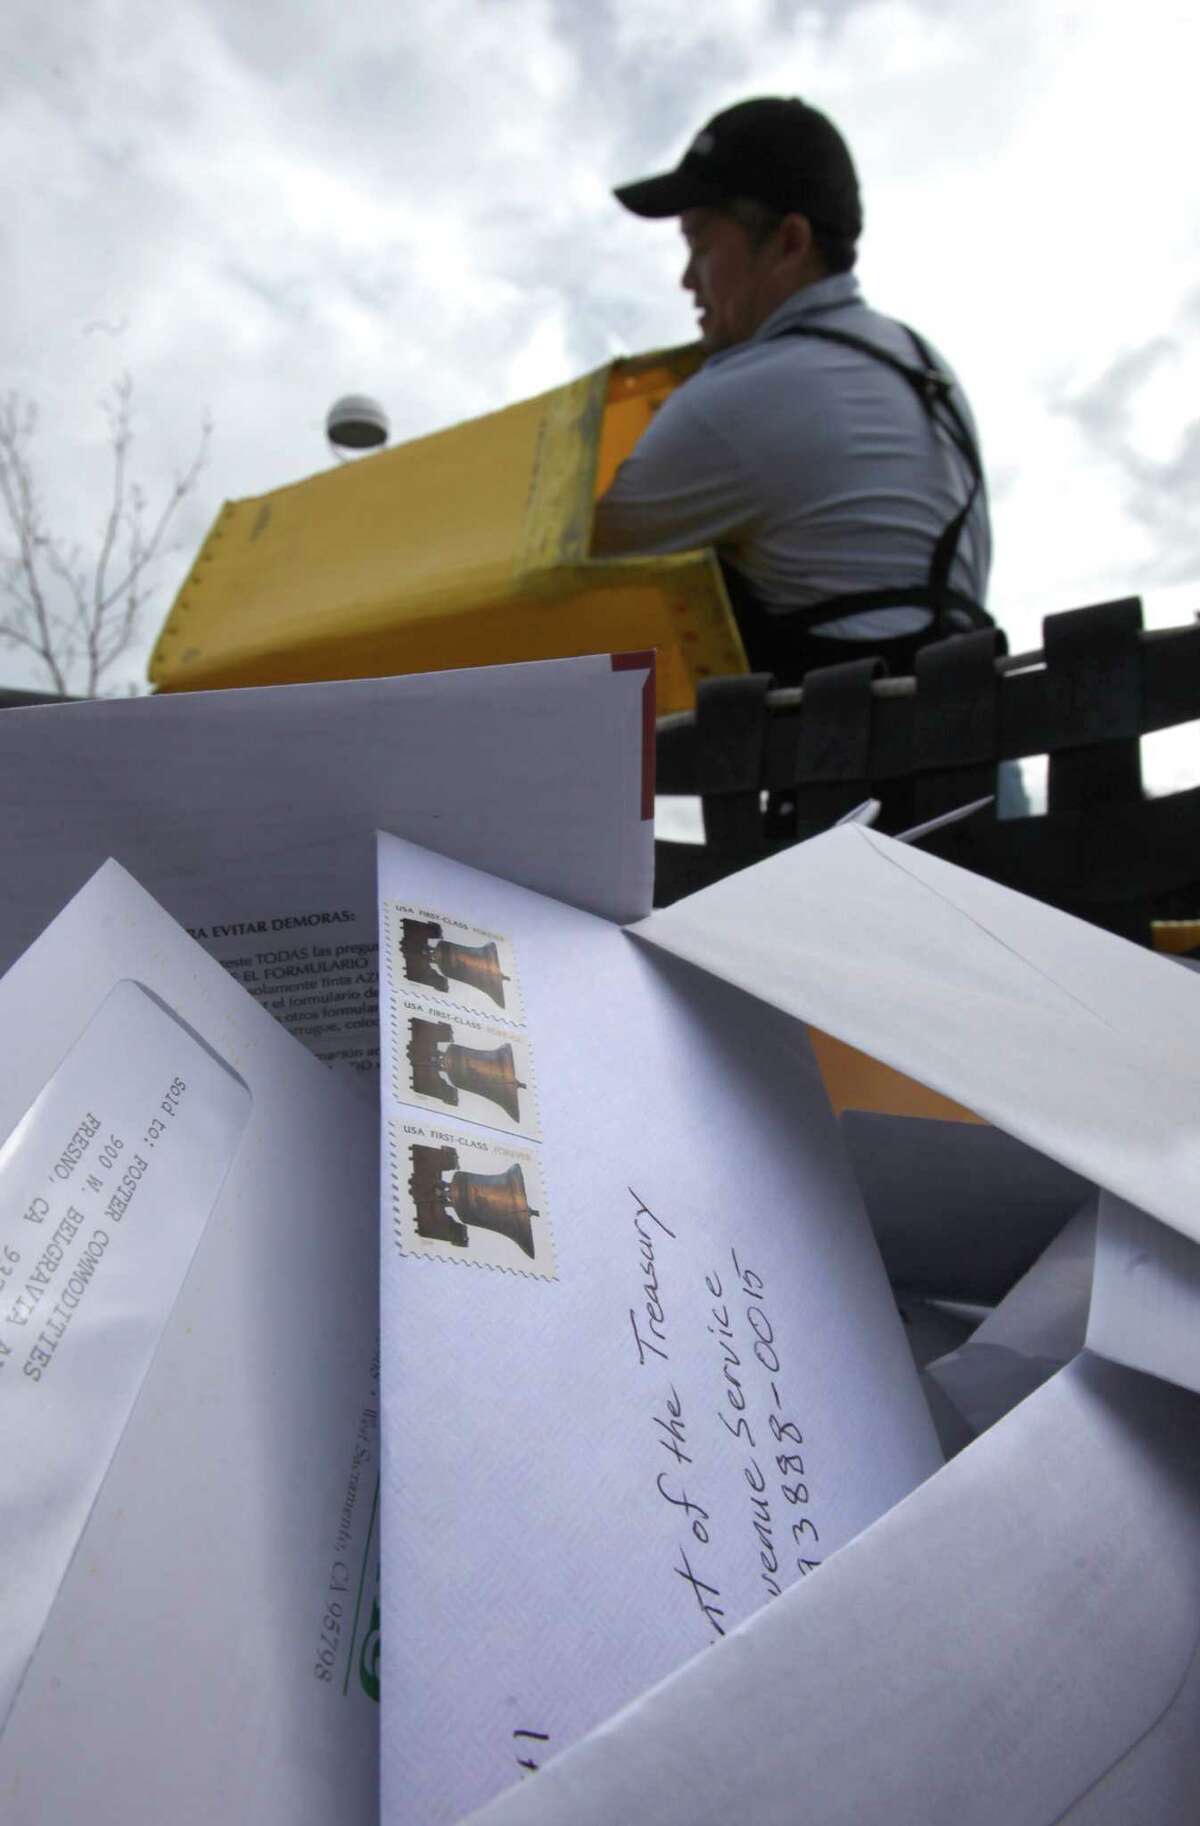 The federal income-tax filing deadline is rapidly approaching. People who are mailing their tax forms have until Monday to get their return postmarked.